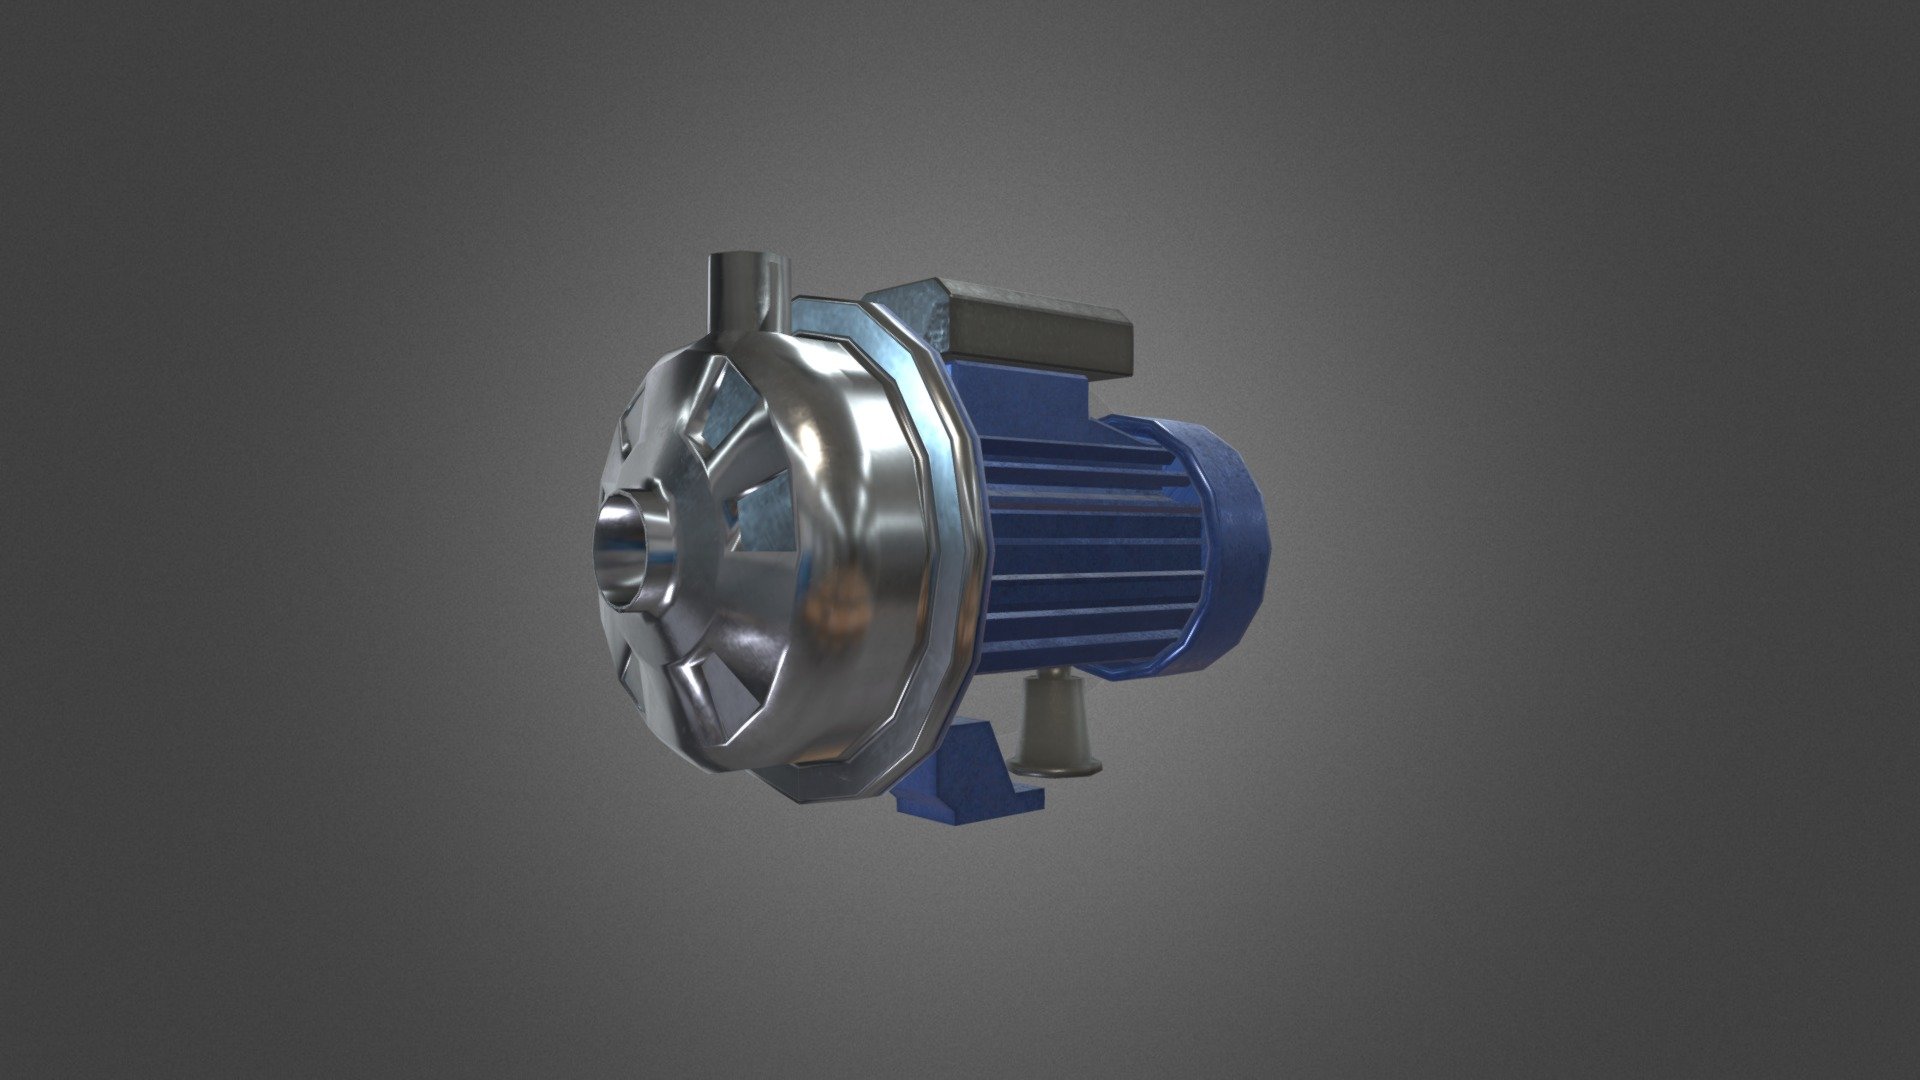 Centrifugal pump used in a brewing process for the transfer of hot wort, and more generally can be used to transfer or discharge a wide variety of liquids.

Part of the Pub &amp; Micro Brewery Asset Pack avaliable on Unity Asset Store.

Features:




Quad-based mesh

Low-poly model suitable for realtime rendering (game engines, AR, VR)

1024px PBR textures, set up for Unity Standard Shader (smoothness is in alpha channel of metallic)

Included files:




Original .blend file 

FBX file

Textures

Reference images where appropriate

Check out the rest of the Brewery Collection: https://skfb.ly/6RwyO - Centrifugal Wort Pump - Buy Royalty Free 3D model by Stainless Reality Ltd (@StainlessReality) 3d model